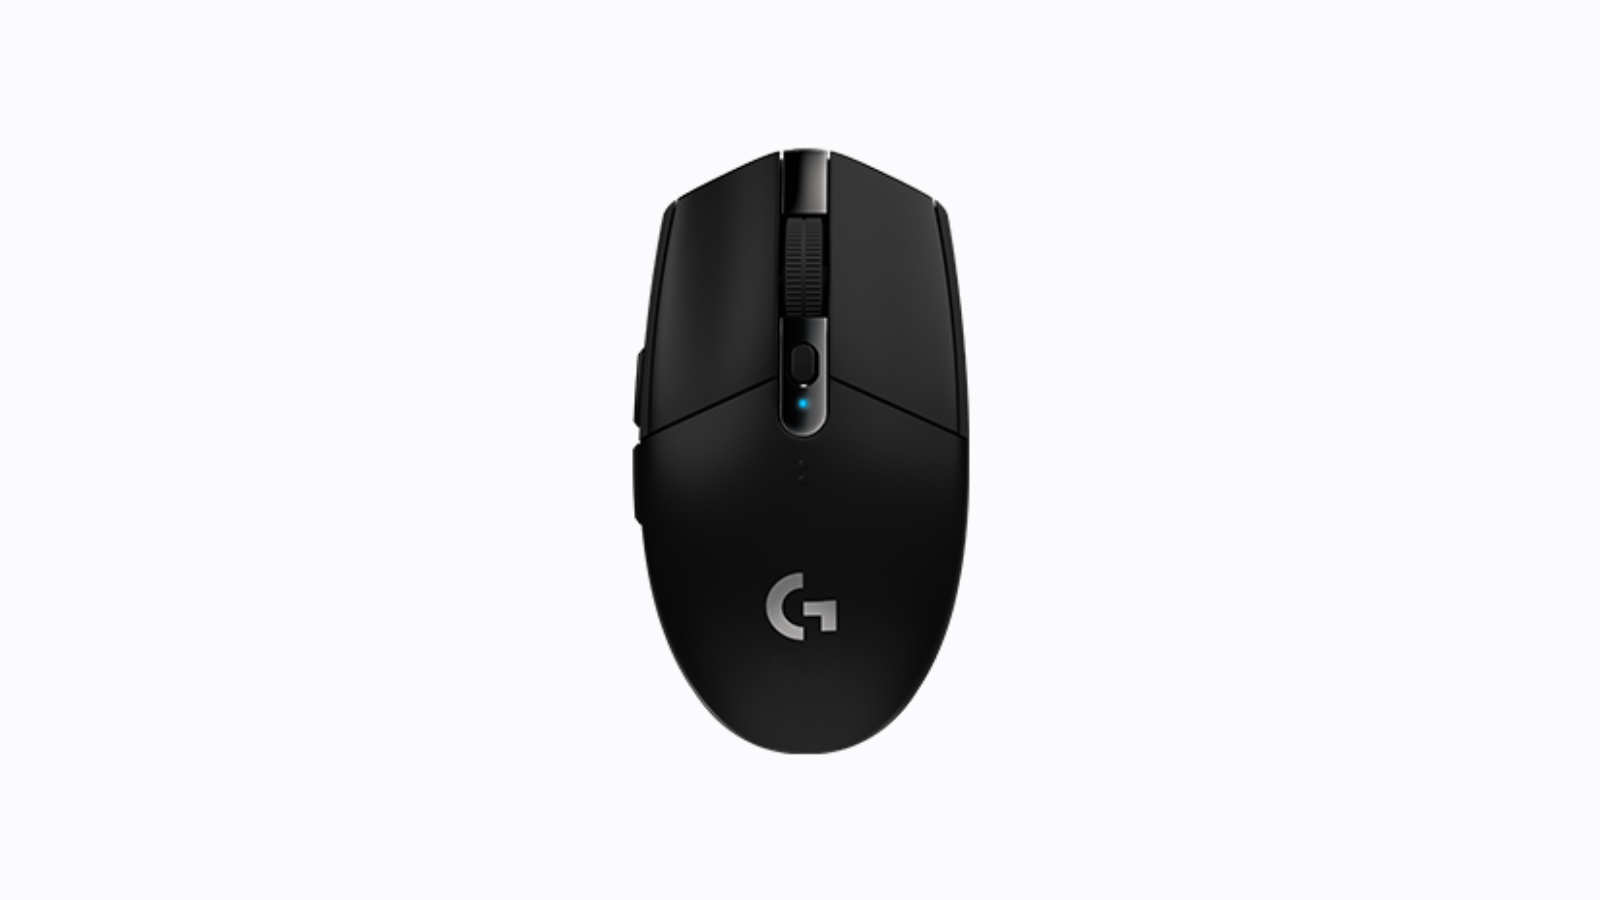 Logitech G305 Lightspeed Review: Top Wireless Gaming Mouse on a Budget